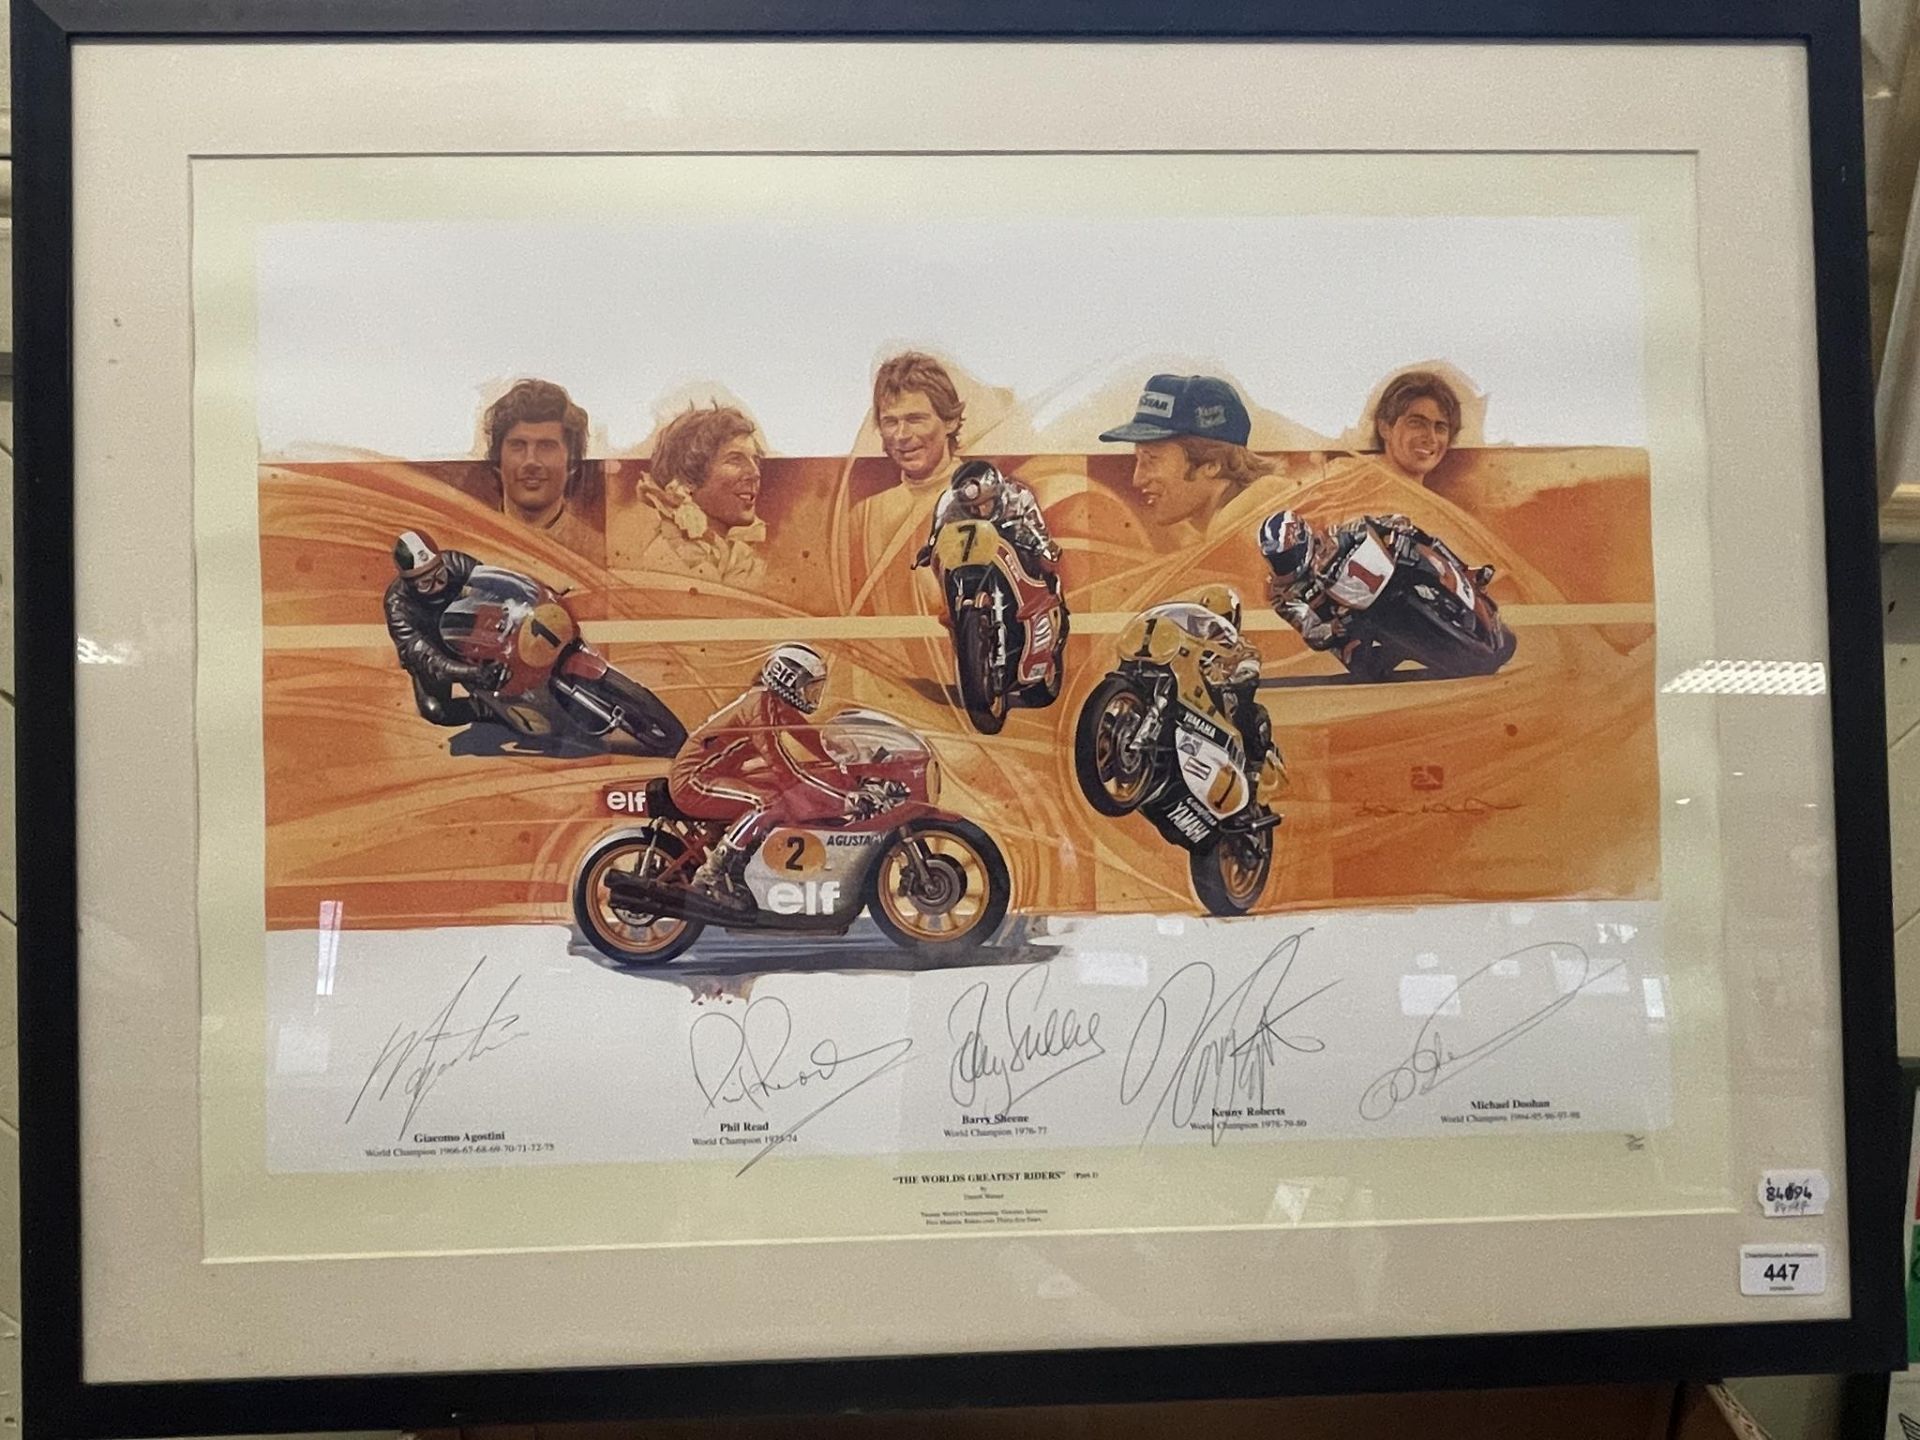 A Darrell Warner print, The Worlds Greatest Riders, Part 1, 79/500, signed by Agostini, Phil Read,